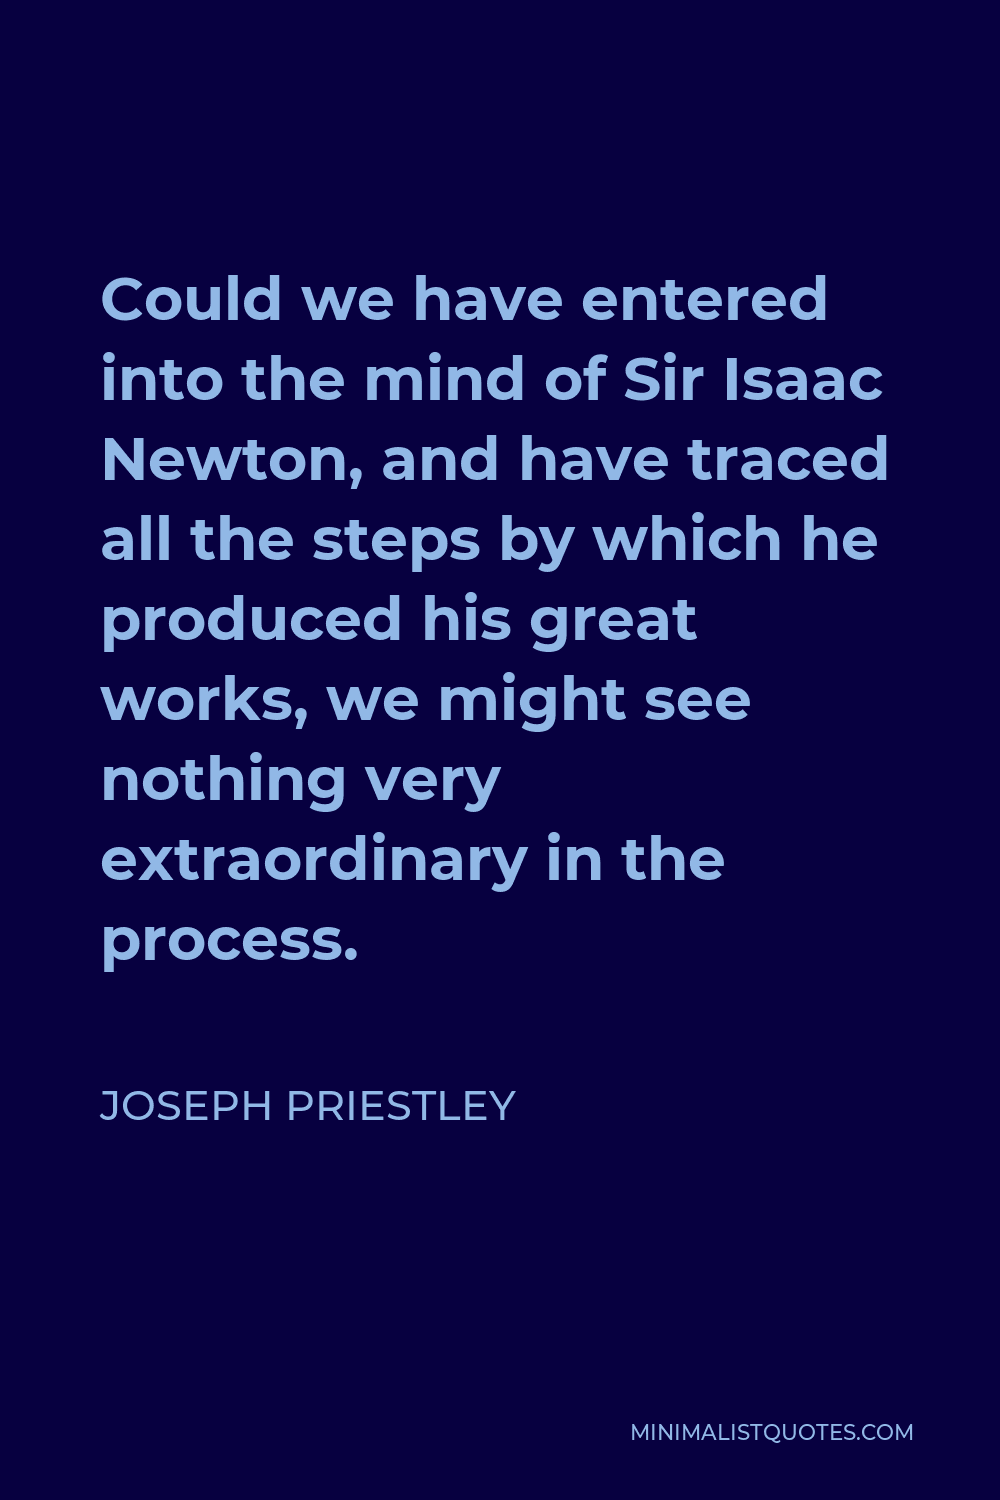 Joseph Priestley Quote - Could we have entered into the mind of Sir Isaac Newton, and have traced all the steps by which he produced his great works, we might see nothing very extraordinary in the process.